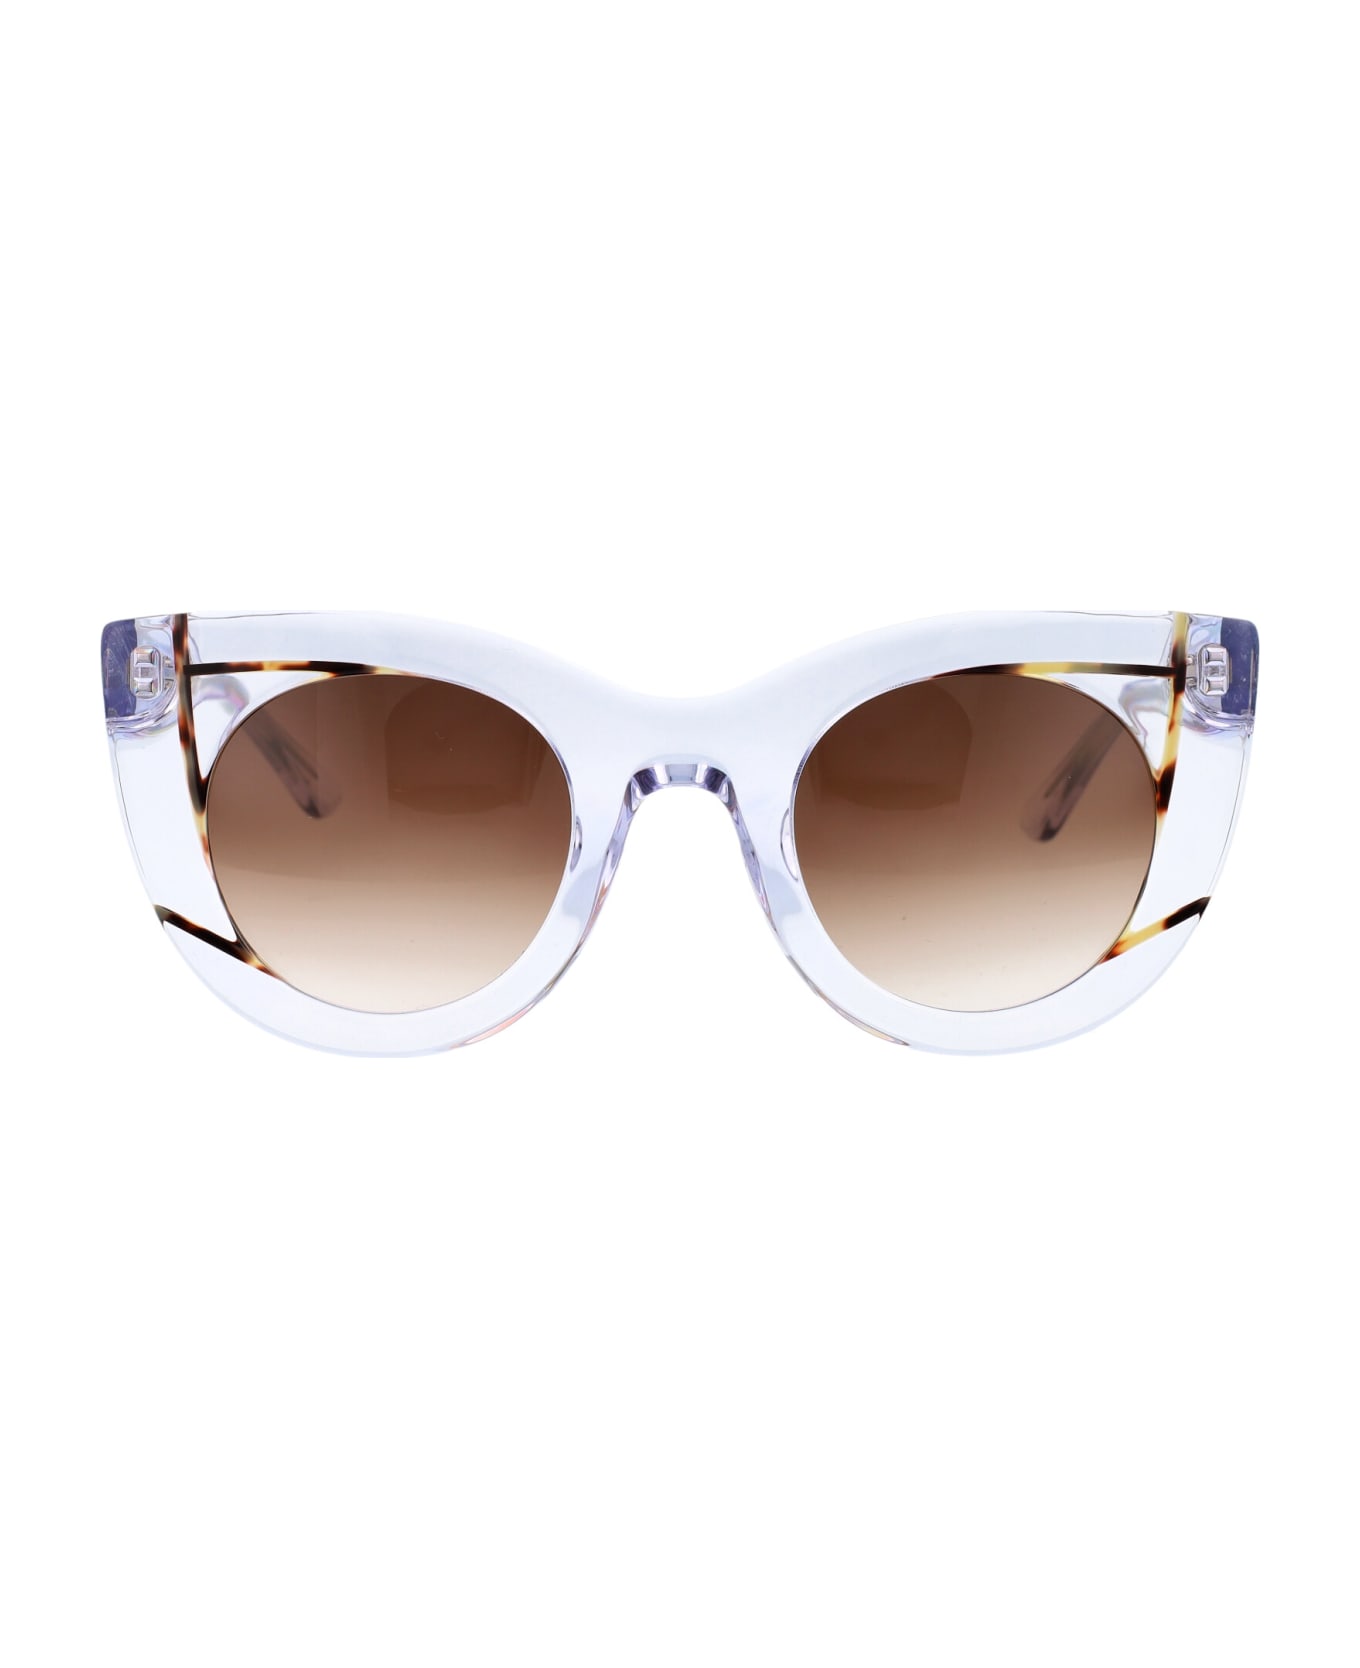 Thierry Lasry Wavvvy Sunglasses - 01 CRYSTAL